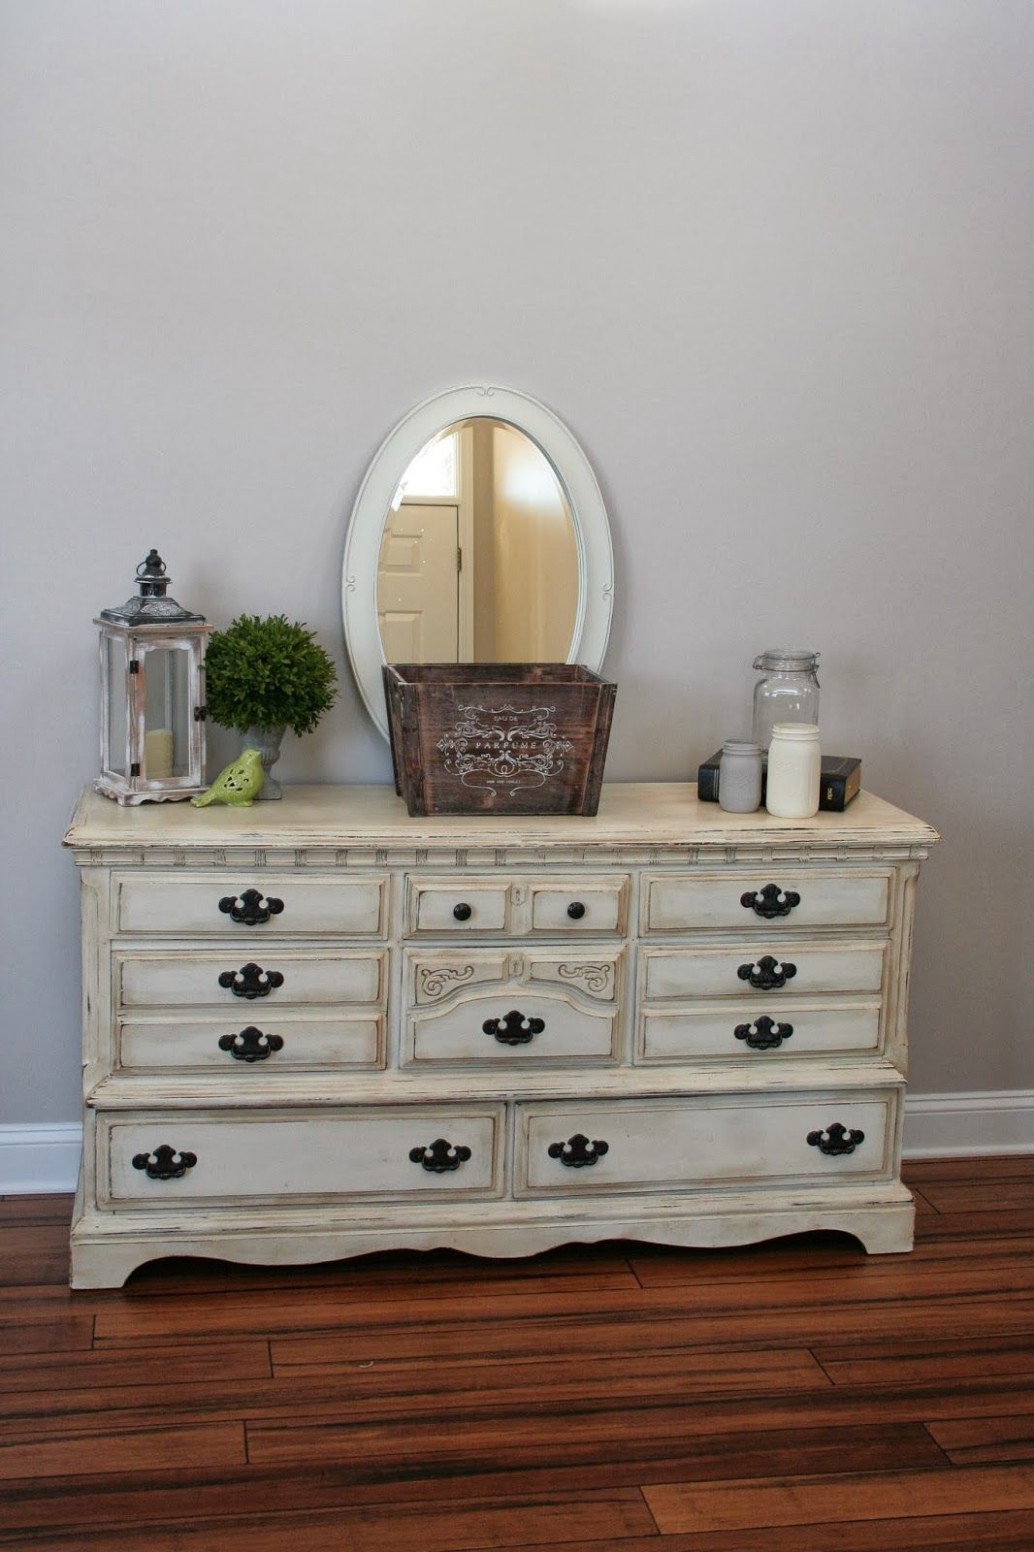 Painted Dresser Using Annie Sloan Chalk Paint In Old White ..